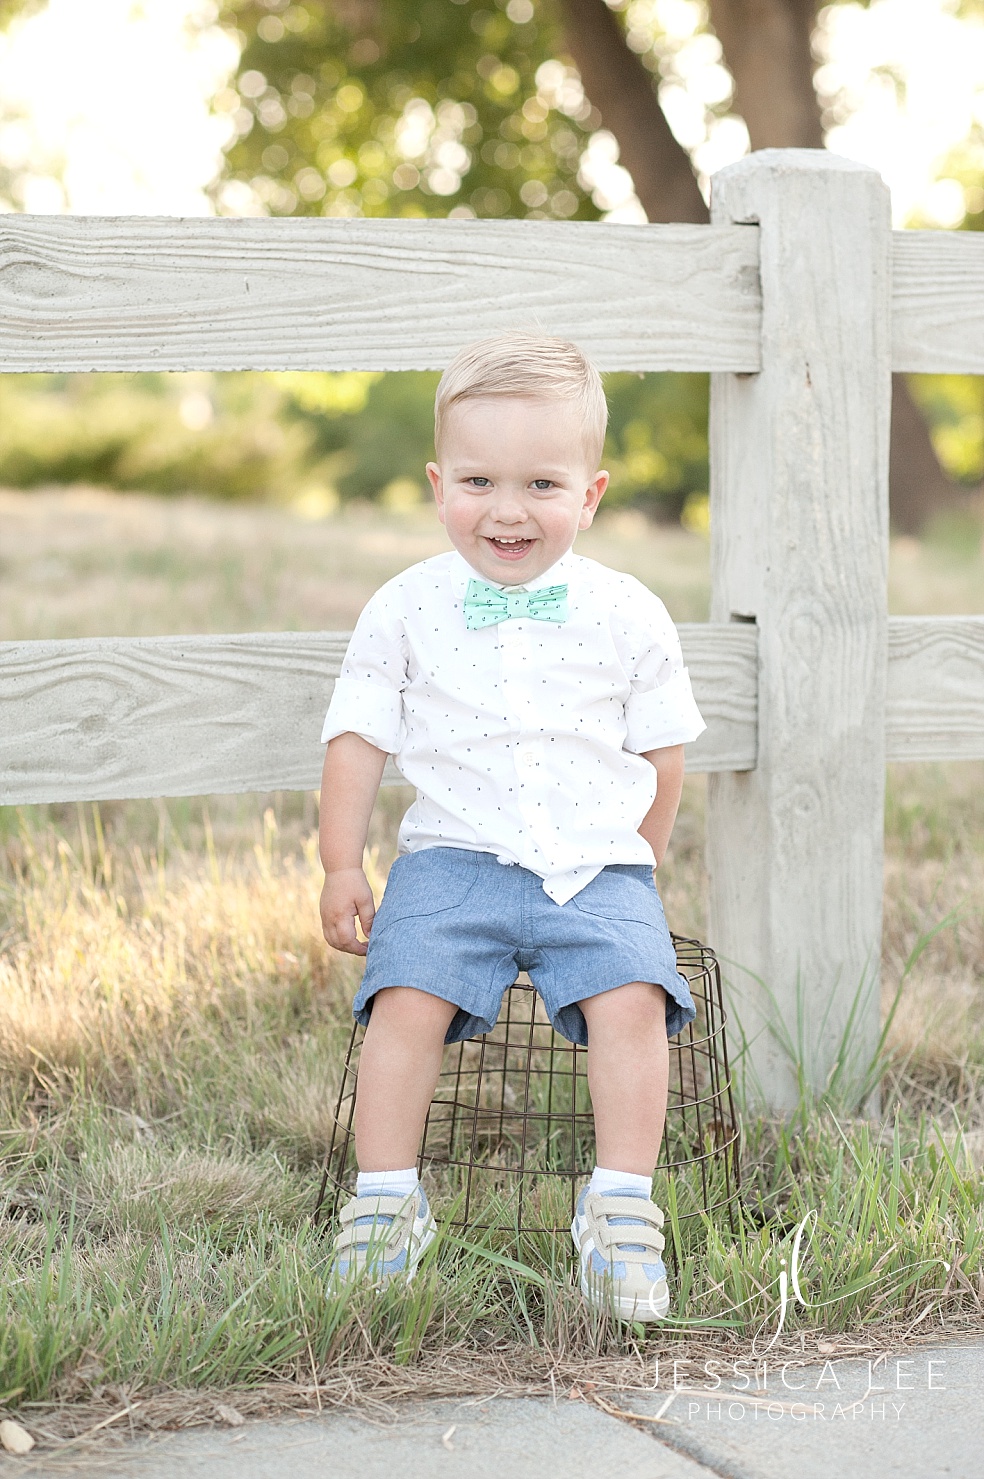 Family Photography Frederick Colorado | Jessica Lee Photography